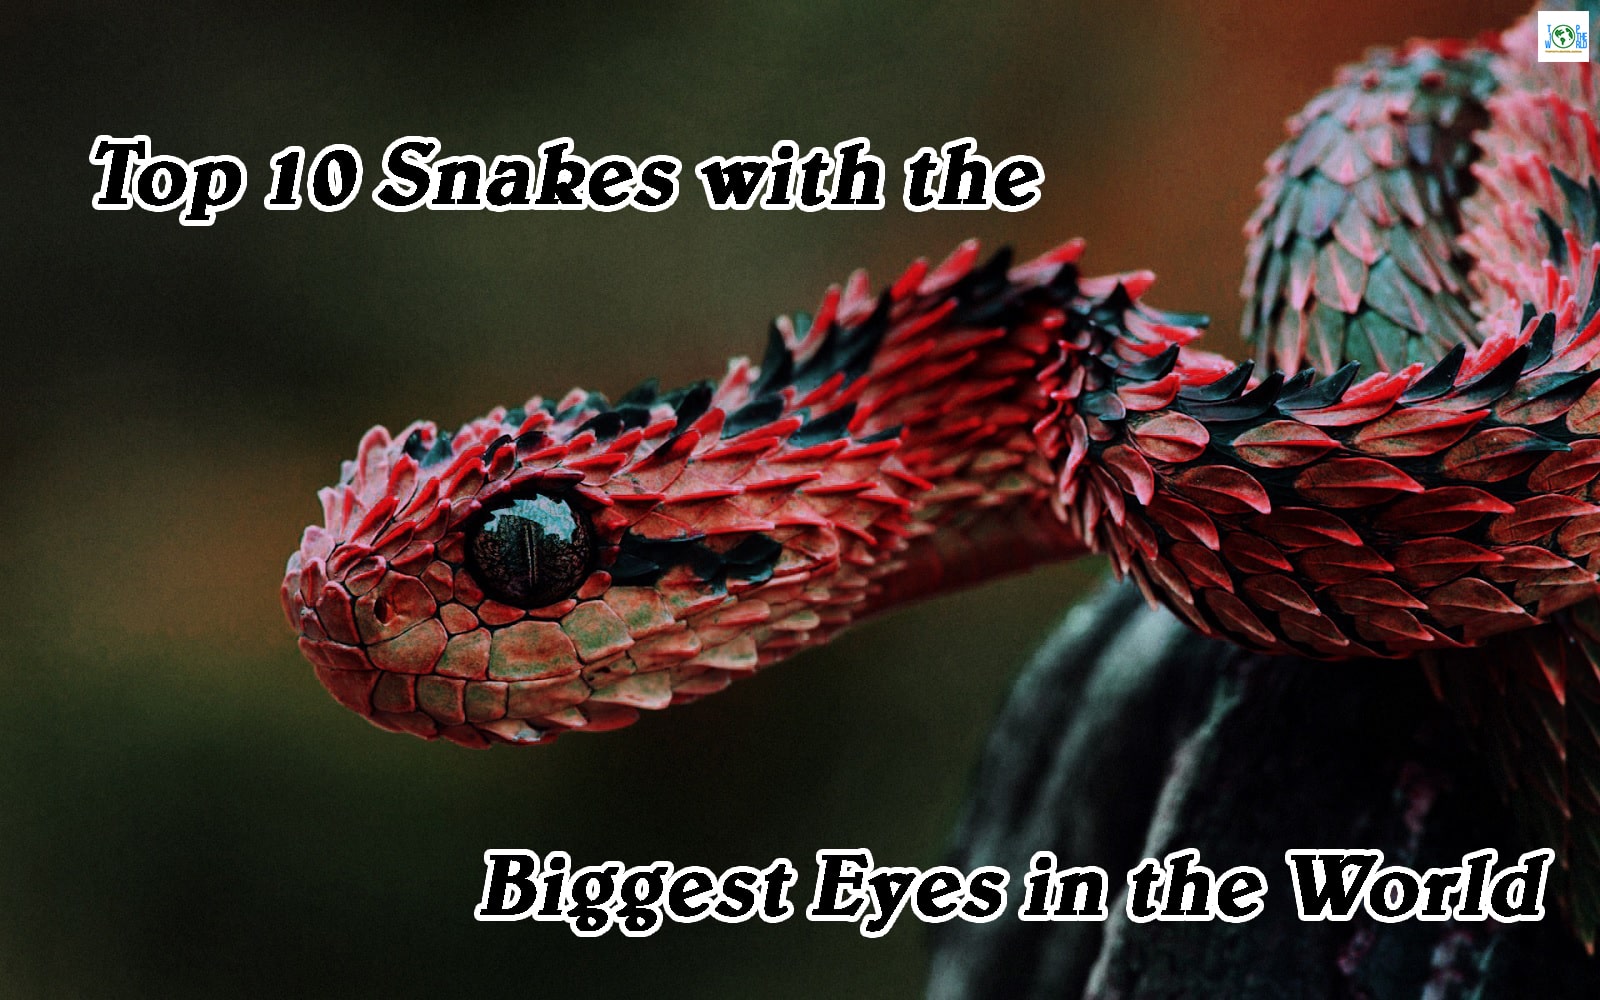 Top 10 Snakes with the Biggest Eyes in the World